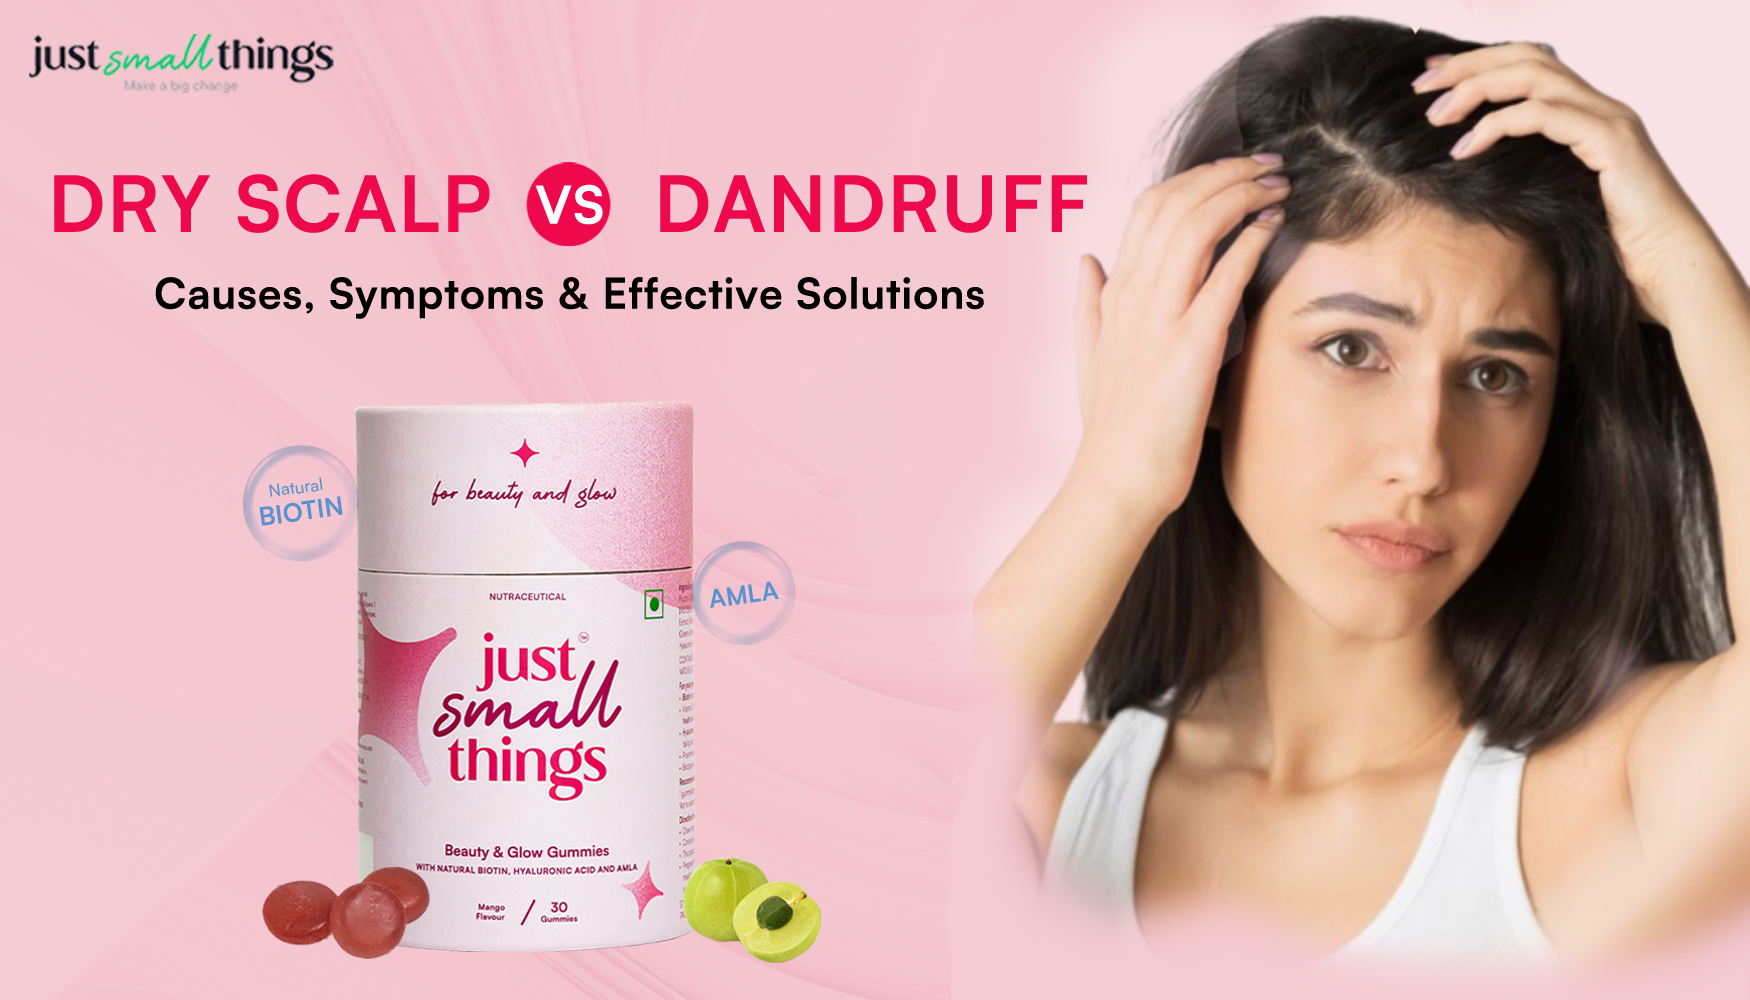 Dry Scalp vs. Dandruff: Causes, Symptoms, and Effective Solutions